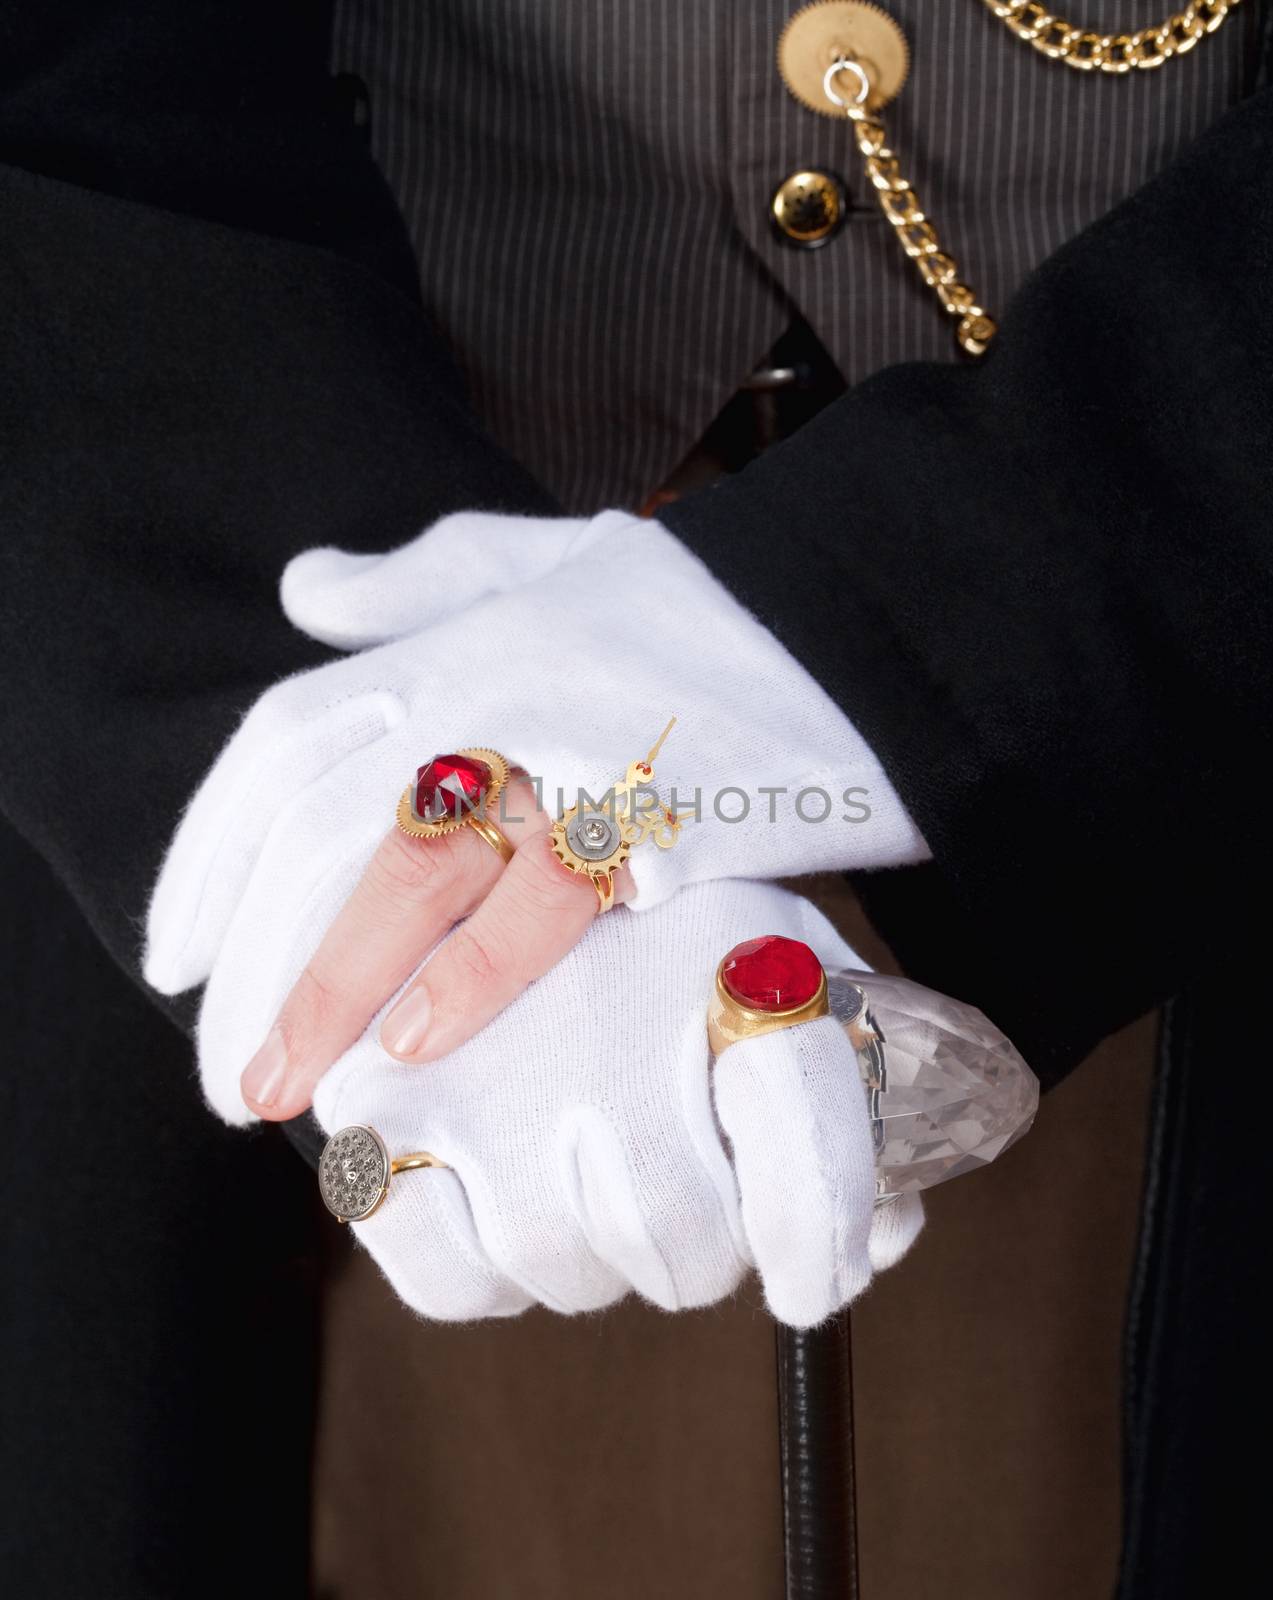 Magician Hands with Gloves and Rings by courtyardpix